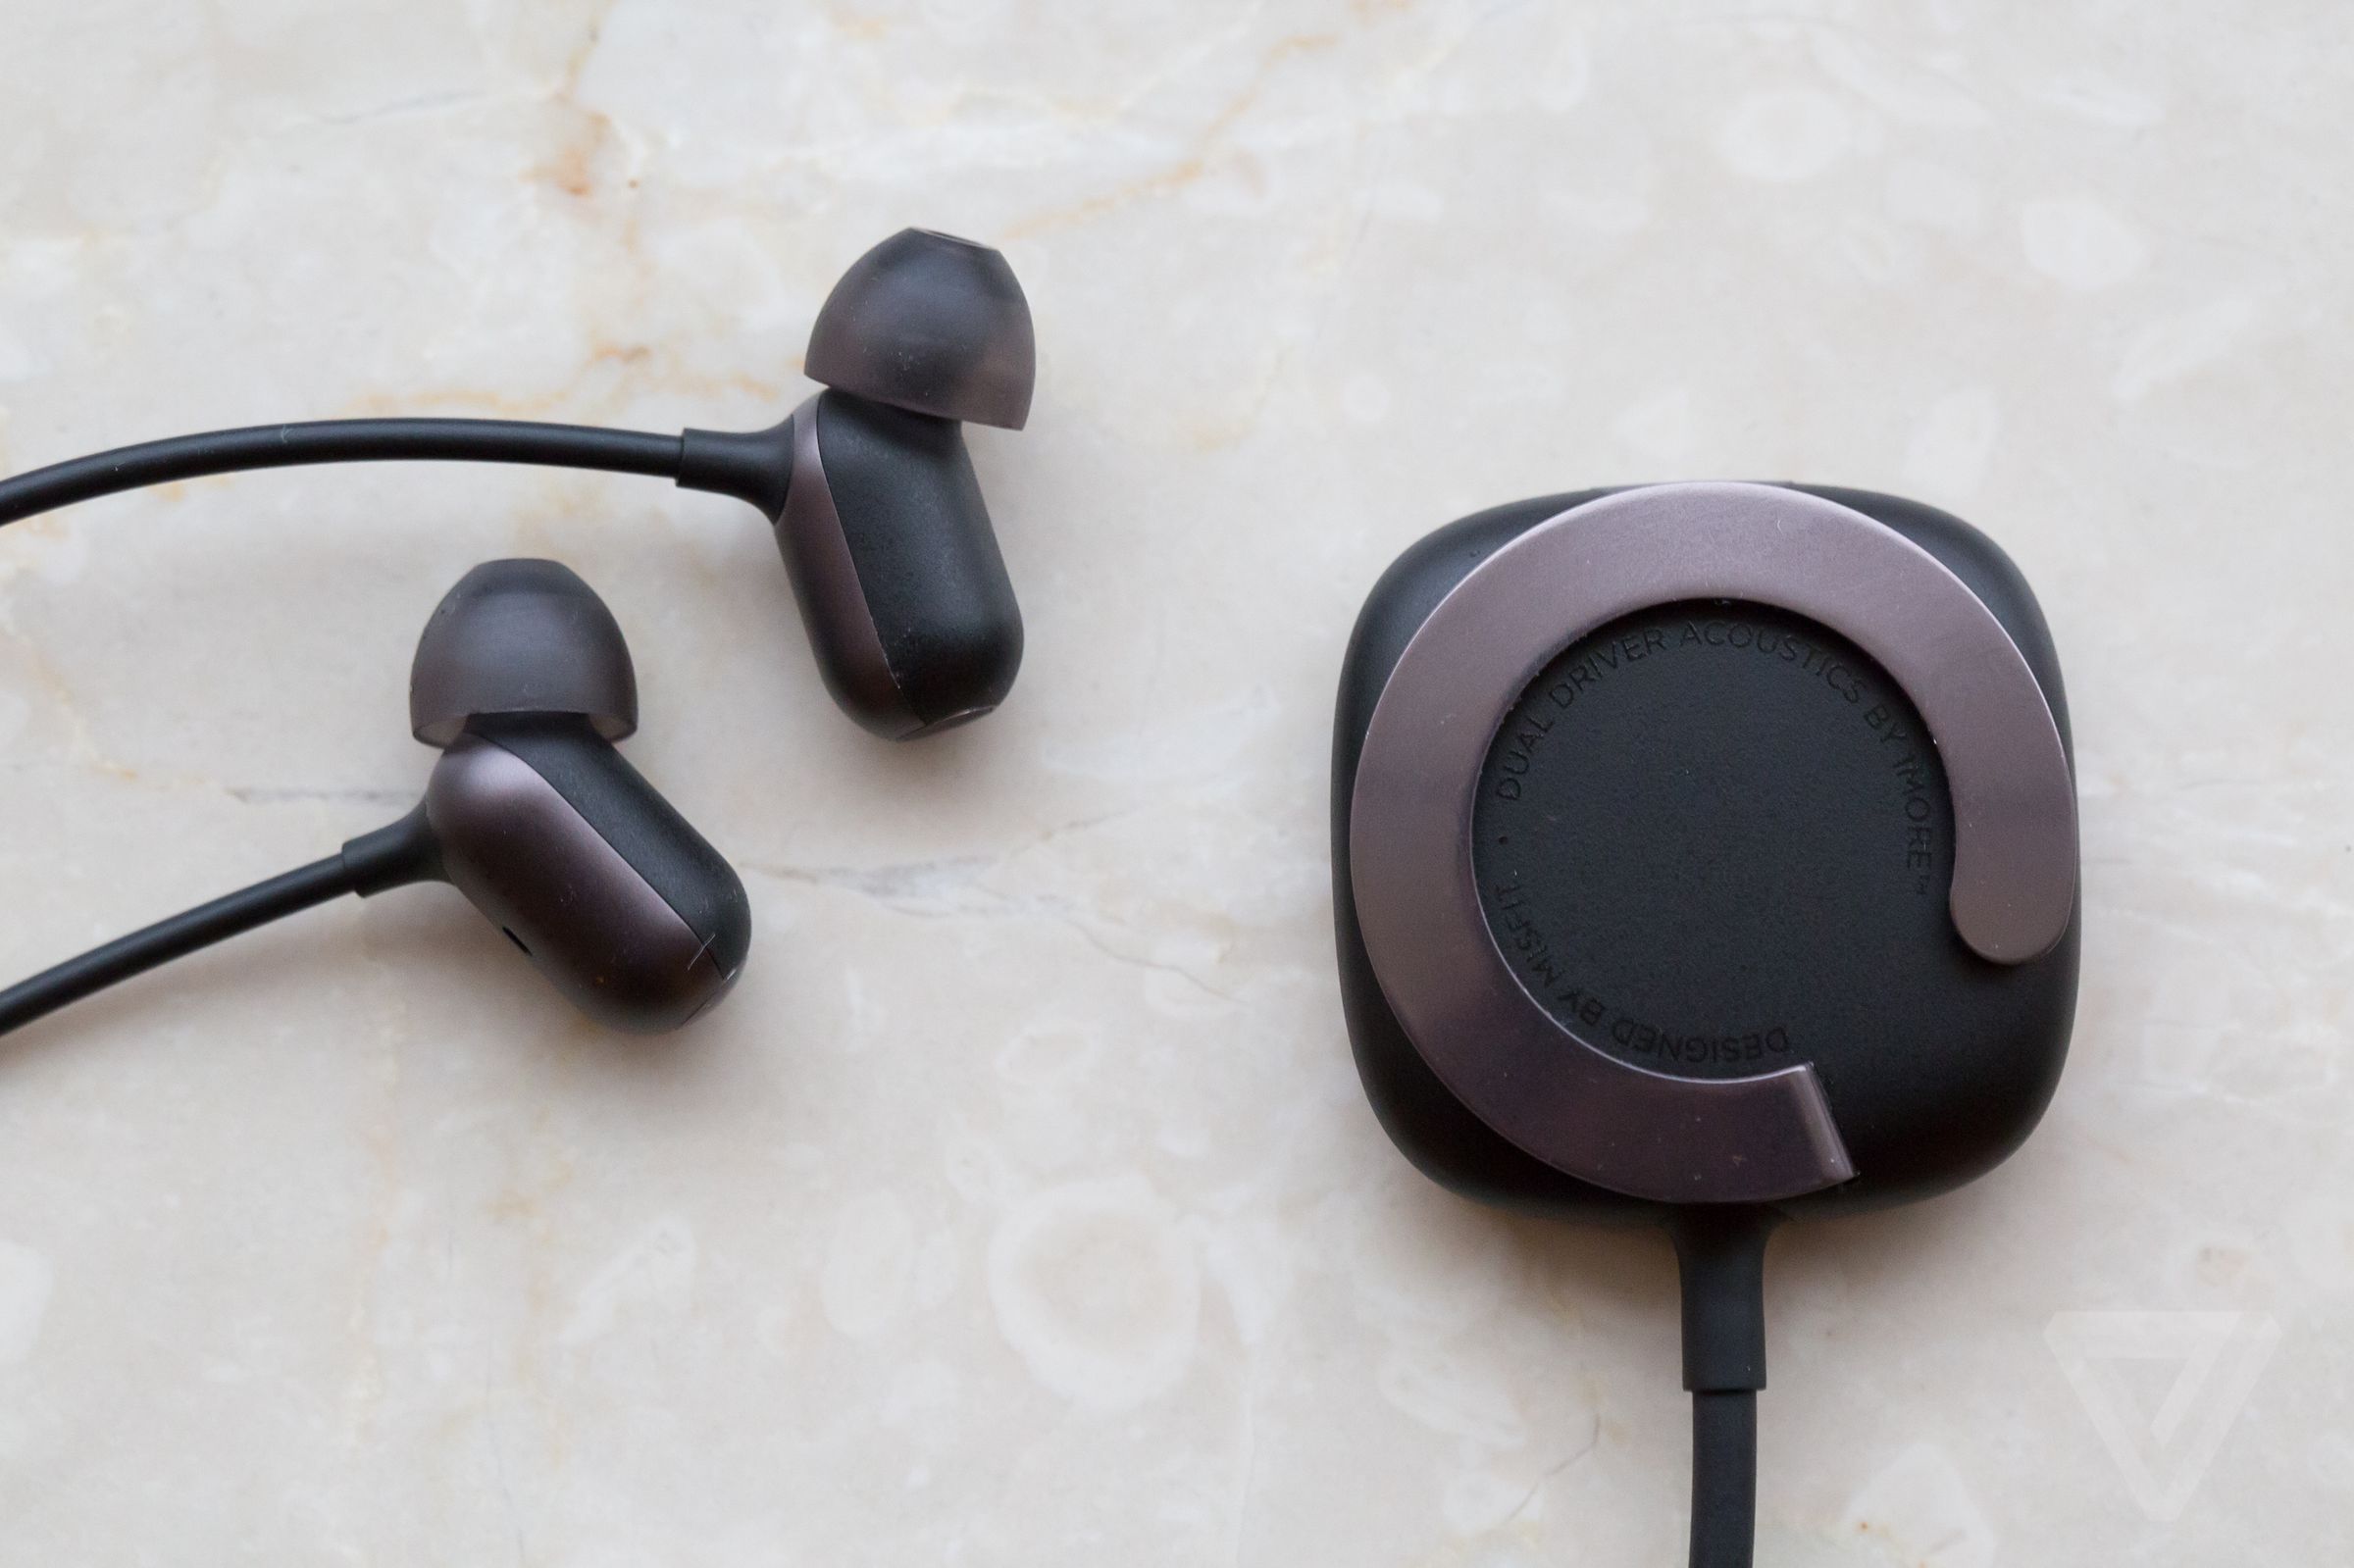 Misfit Specter Bluetooth earbuds in photos